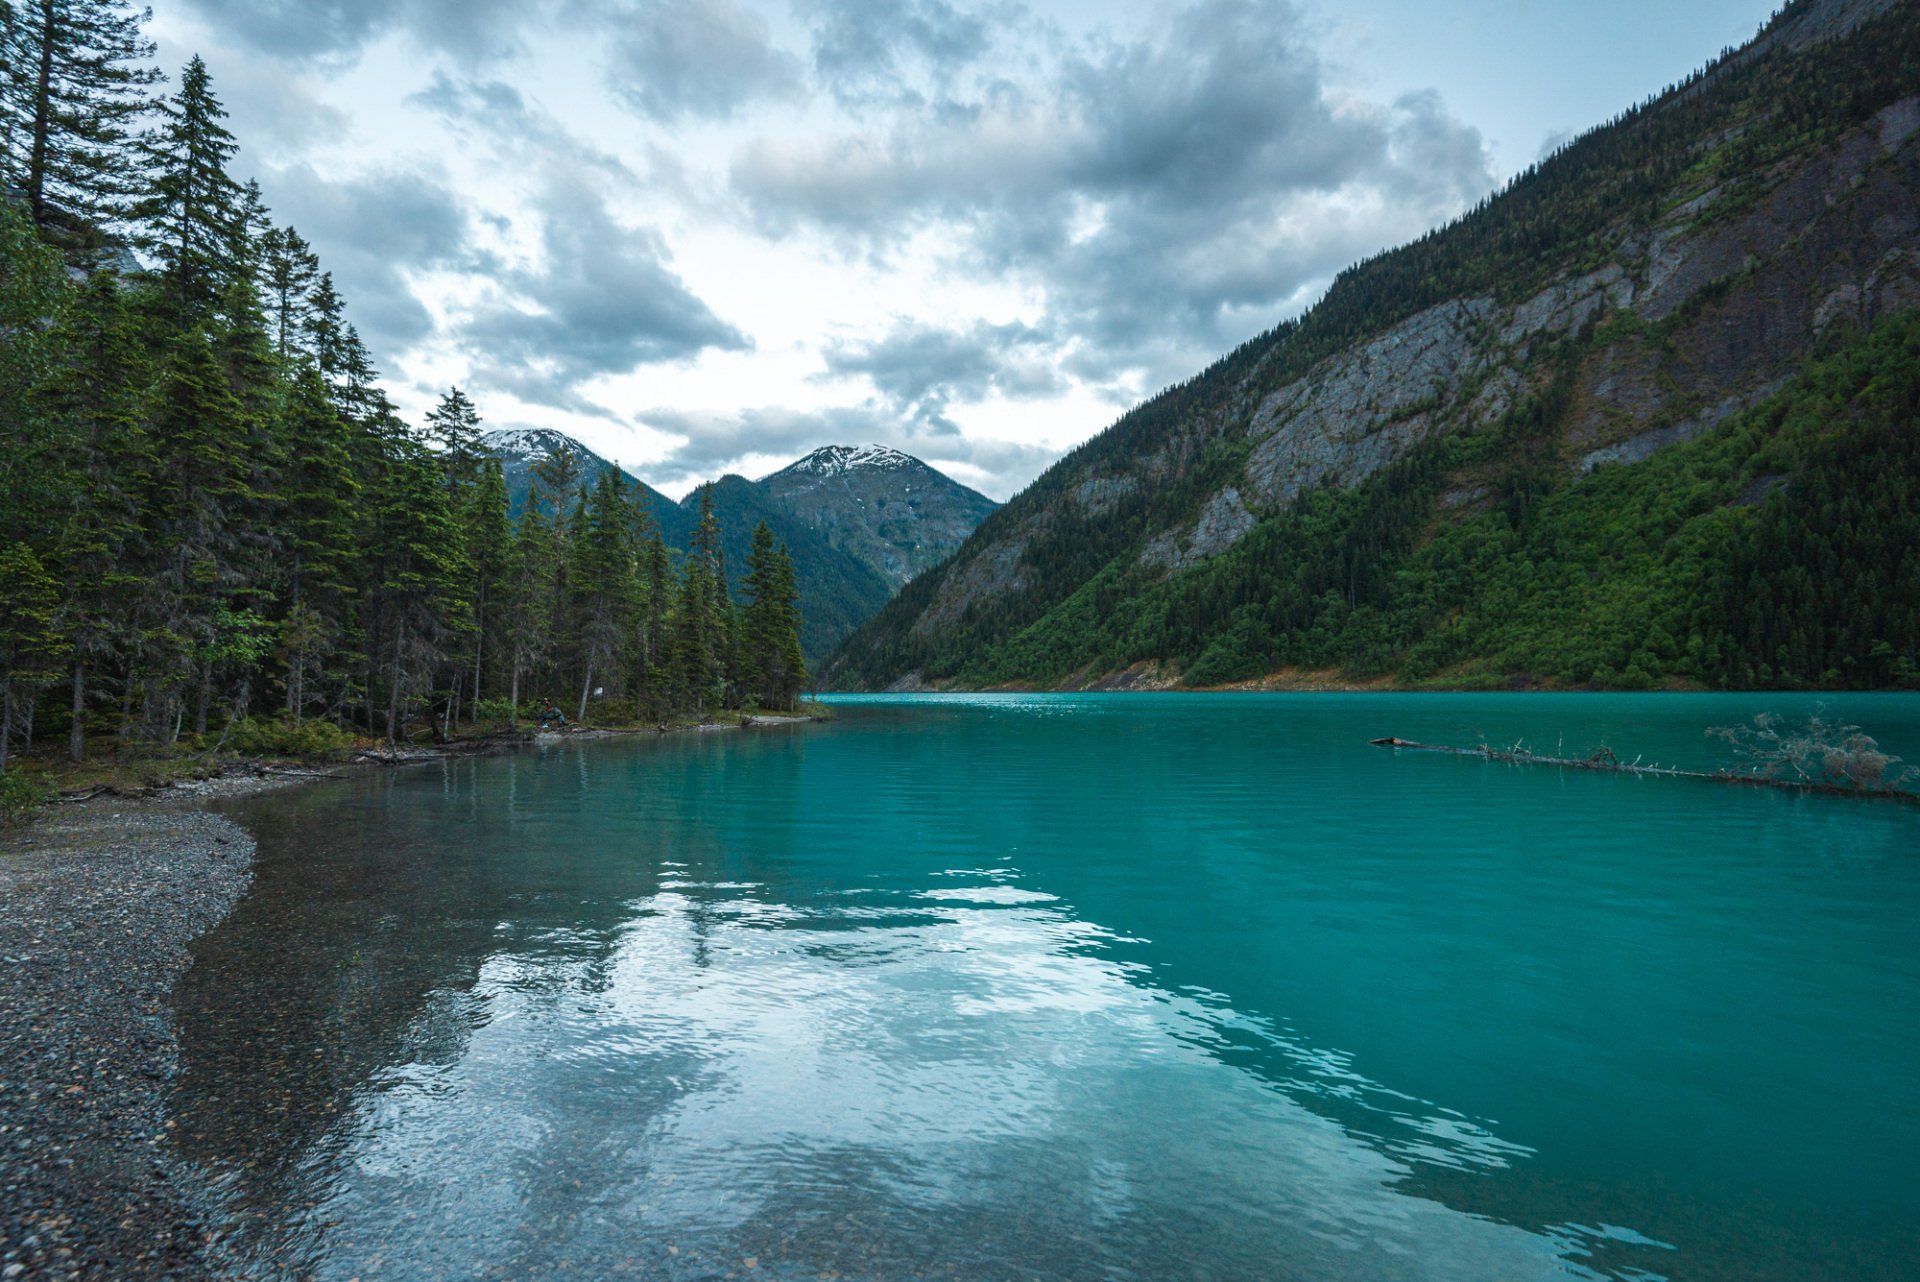 Dusk at Kinney lake, Mt Robson park, BC, Canada. Turquoise lake and mountains